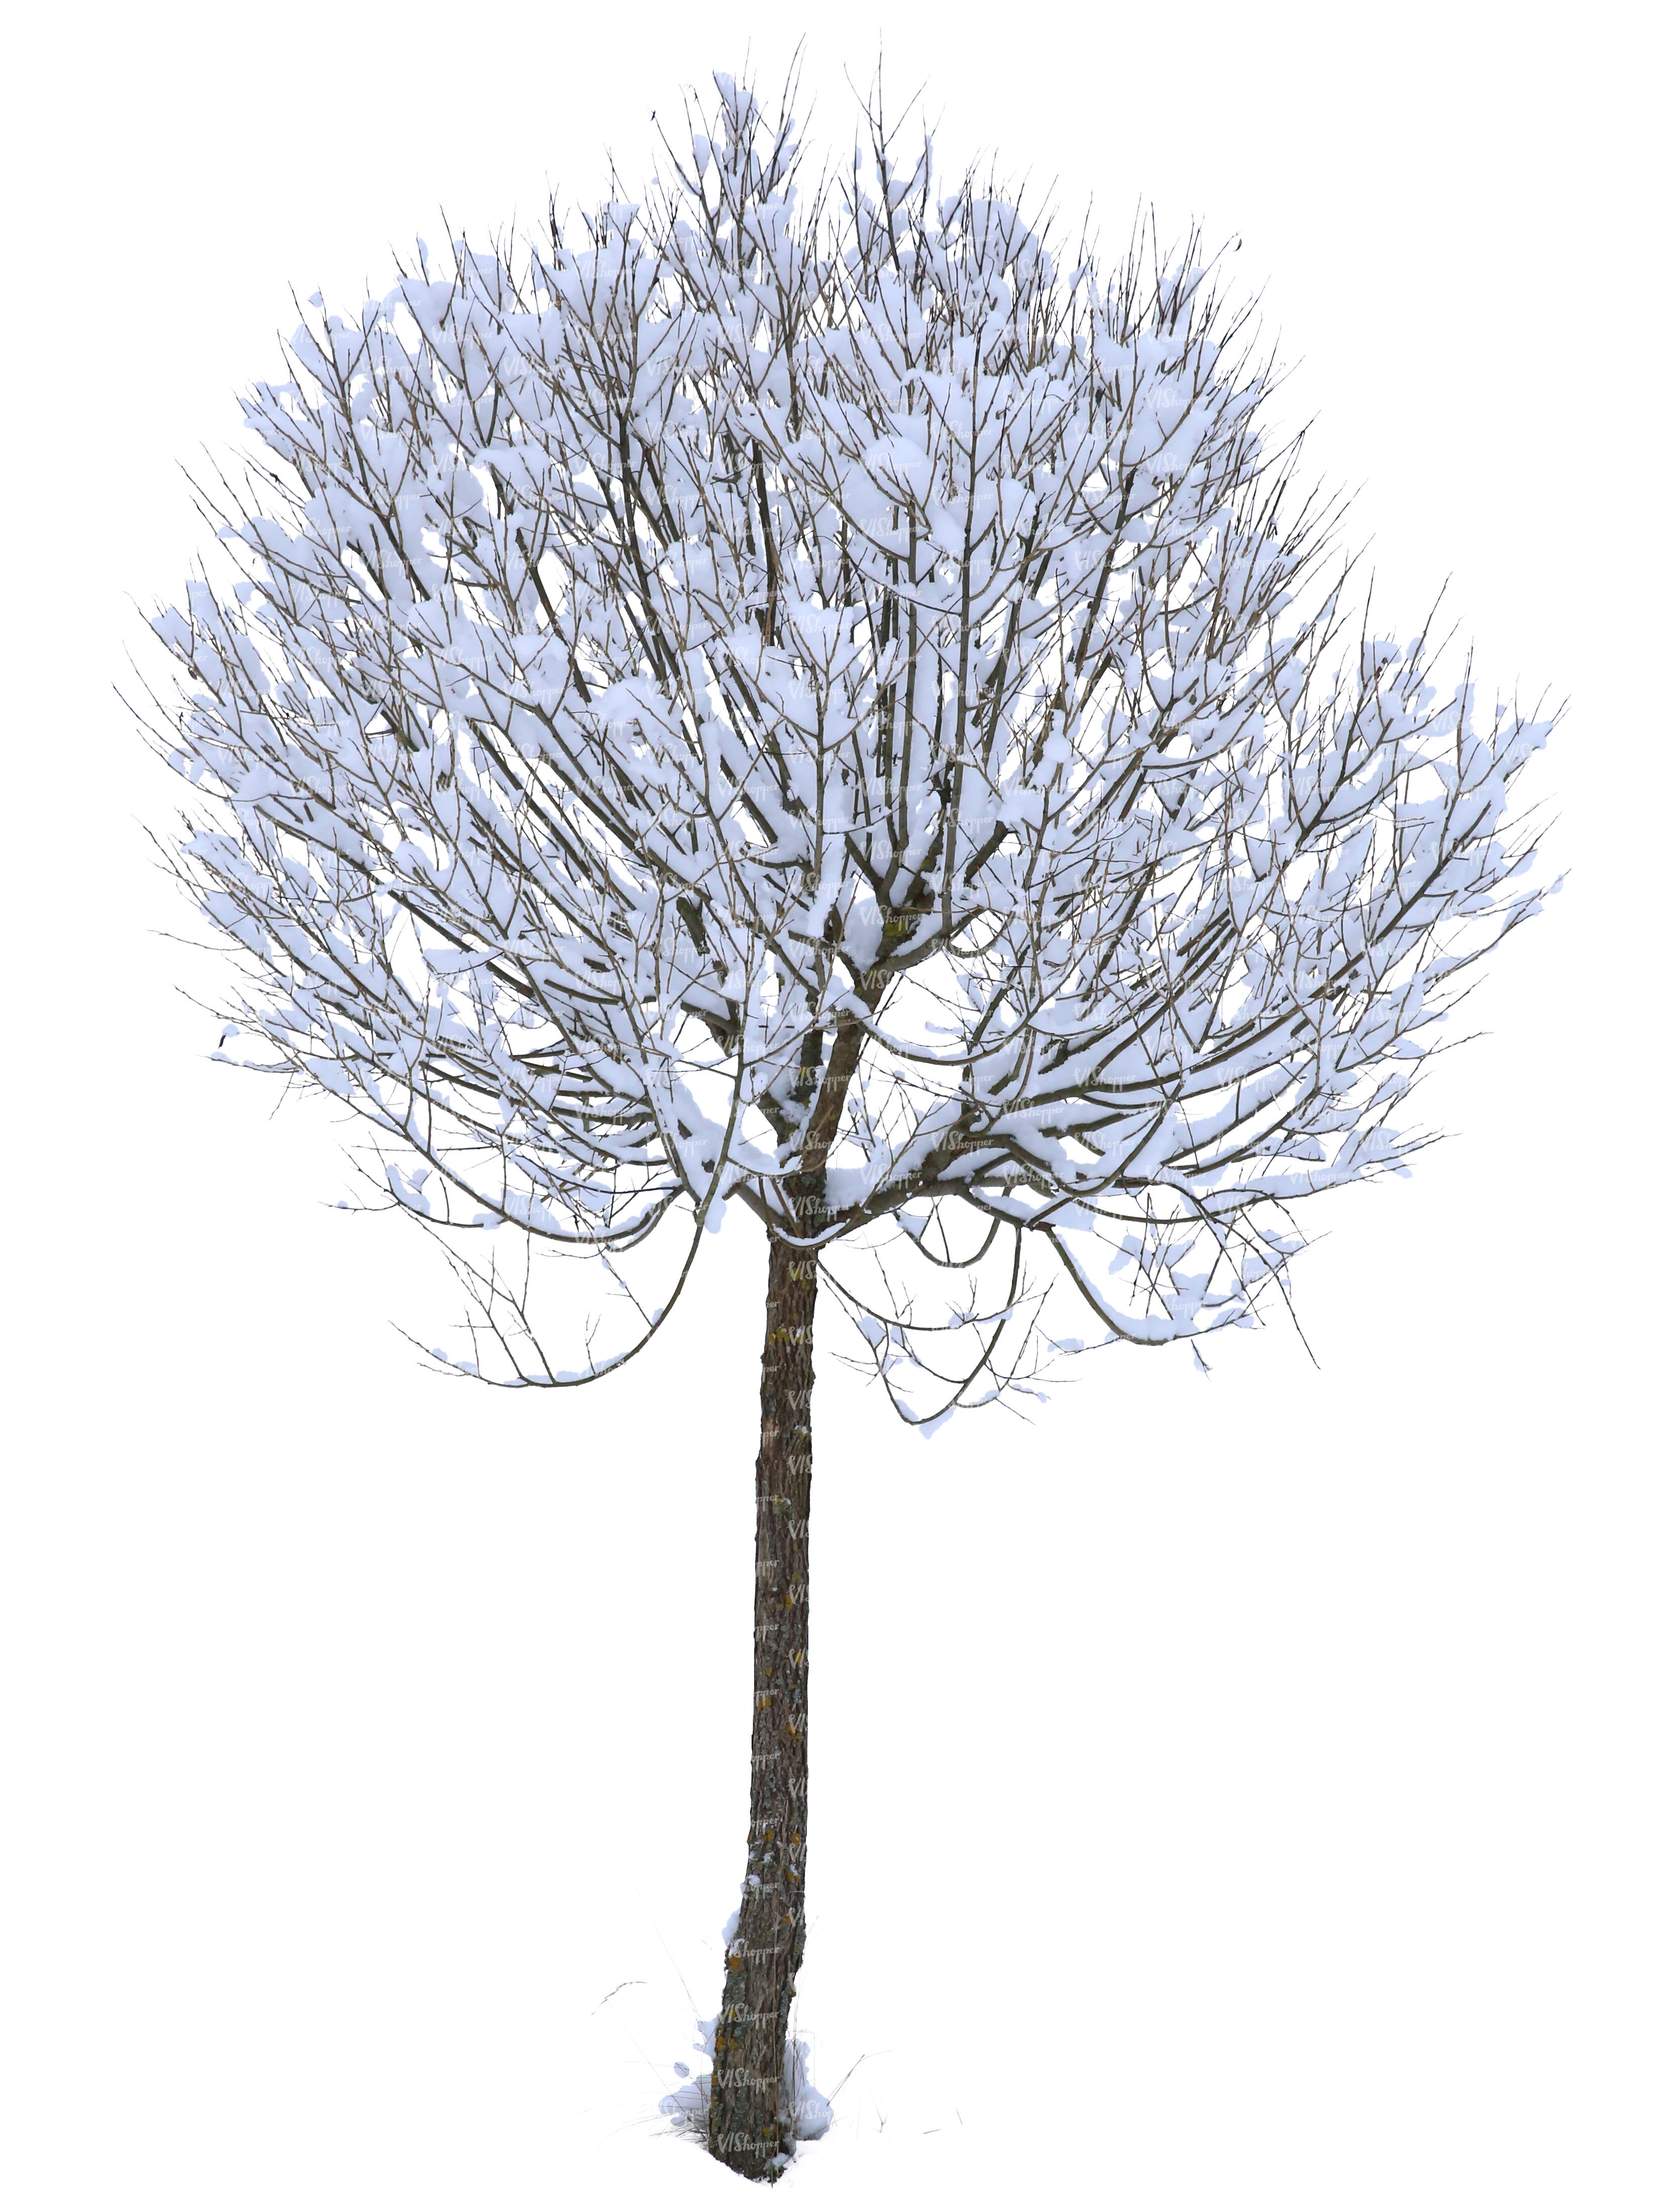 winter tree in ambient light - cut out trees and plants - VIShopper